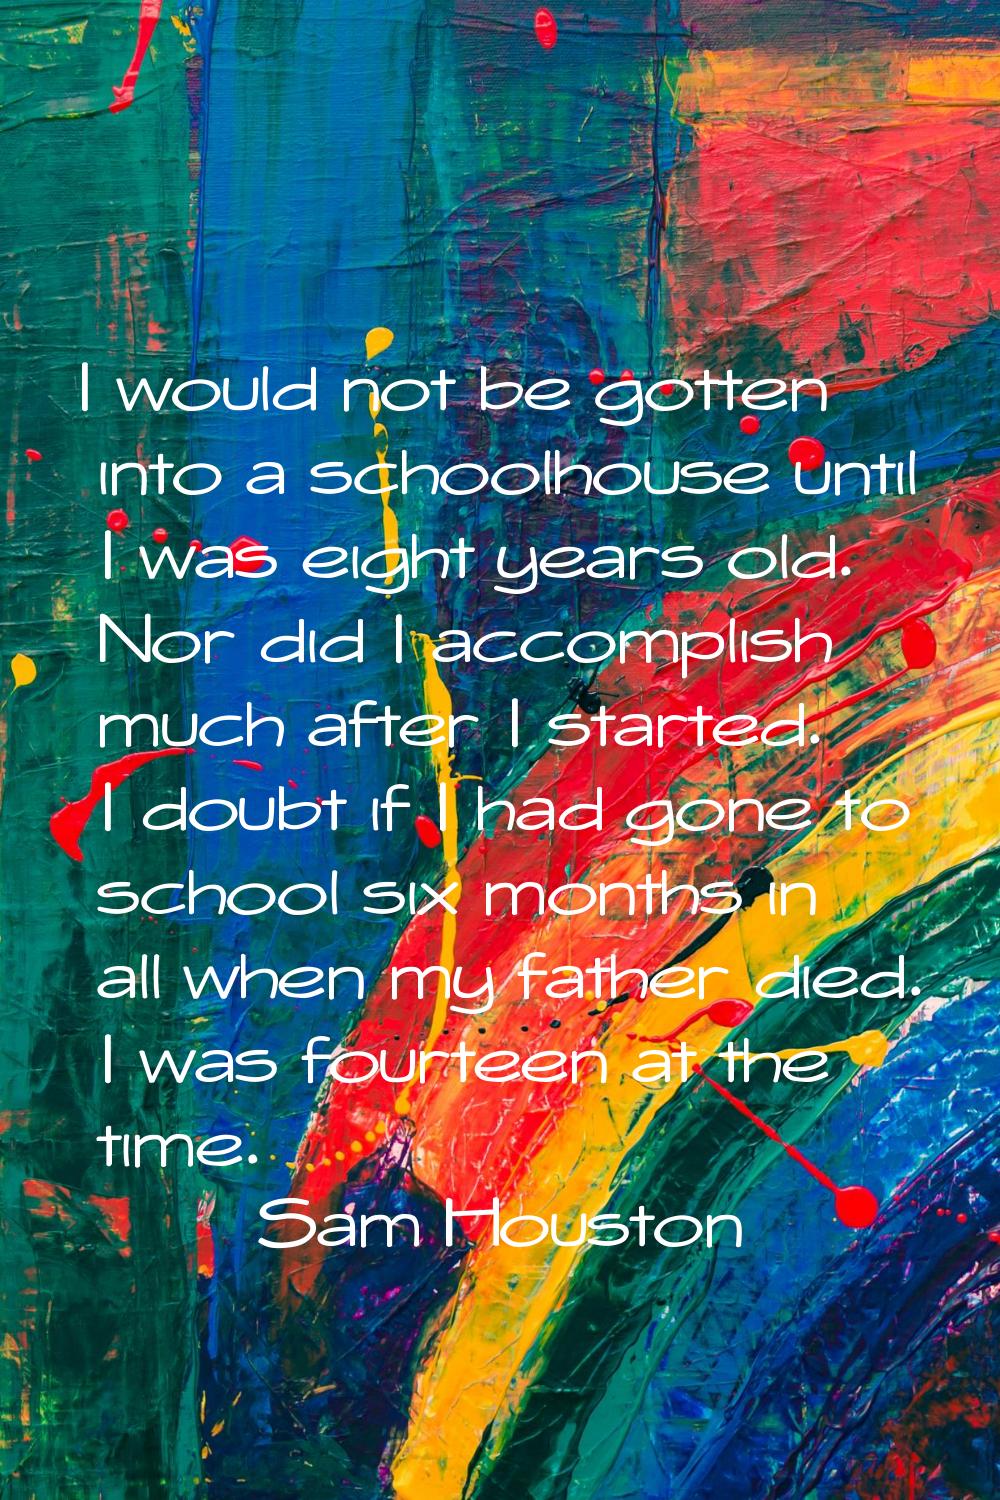 I would not be gotten into a schoolhouse until I was eight years old. Nor did I accomplish much aft